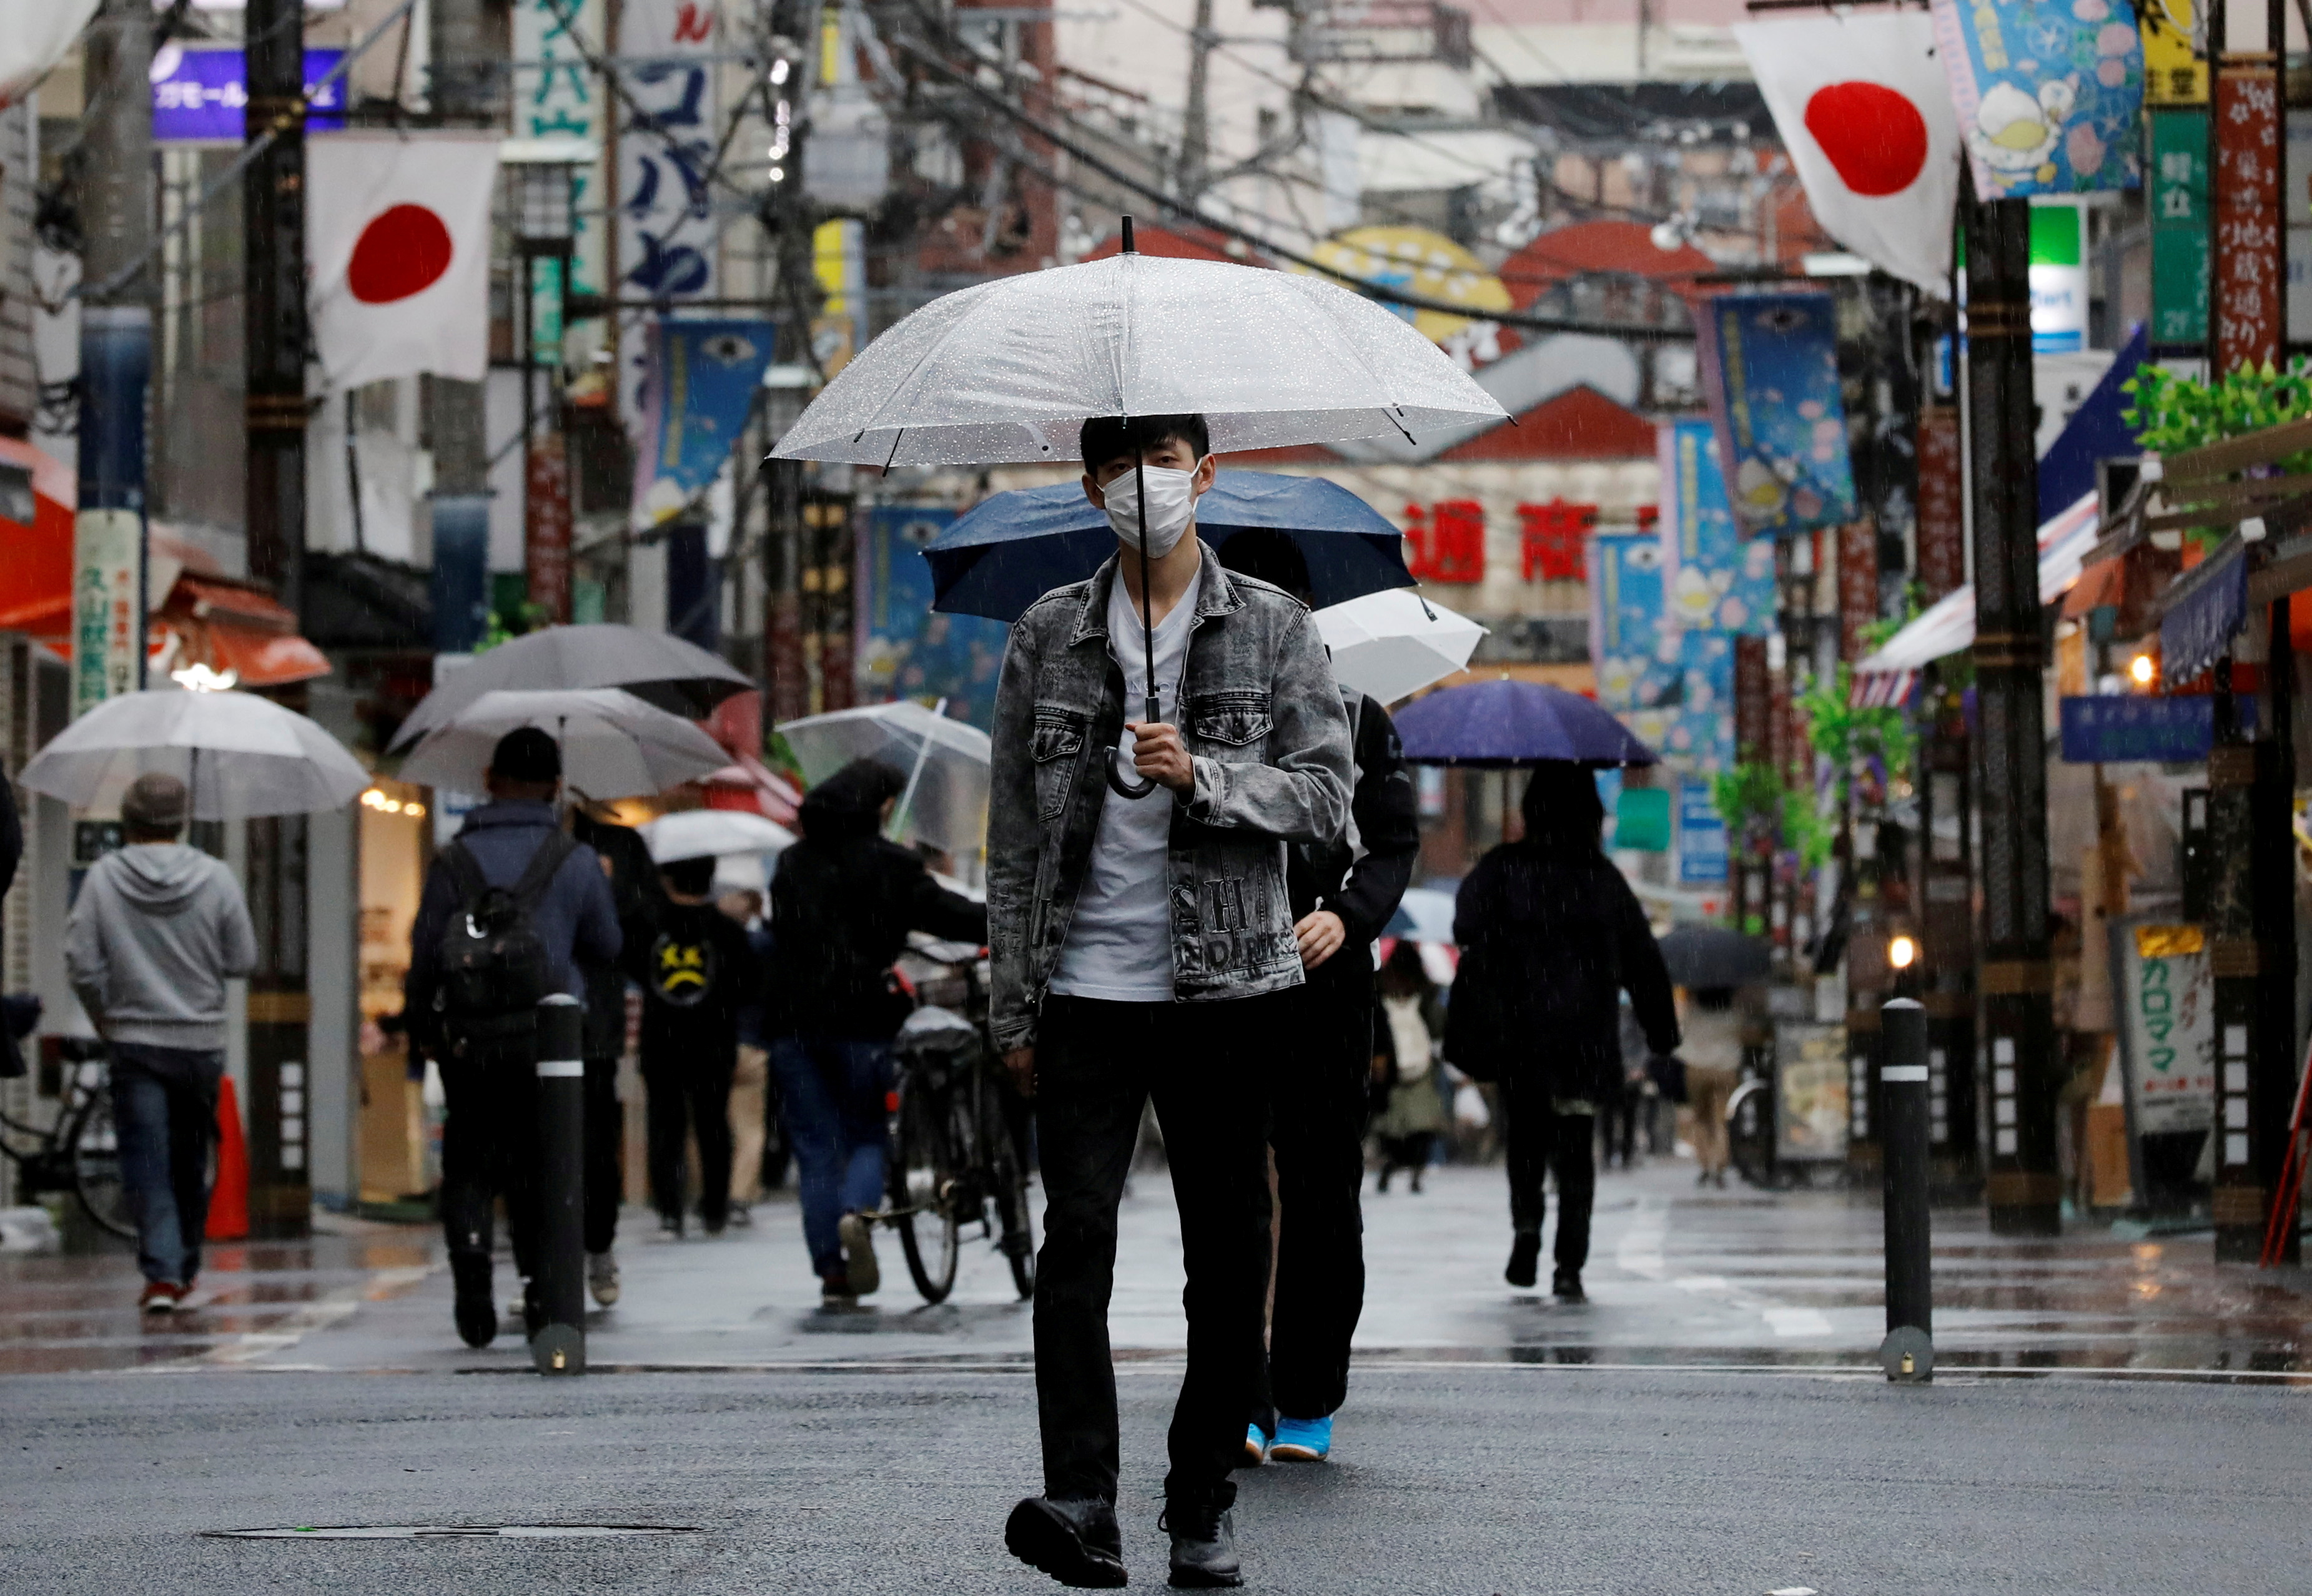 Japan&#39;s Q3 growth forecast cut as new pandemic curbs hit: Reuters poll | Reuters